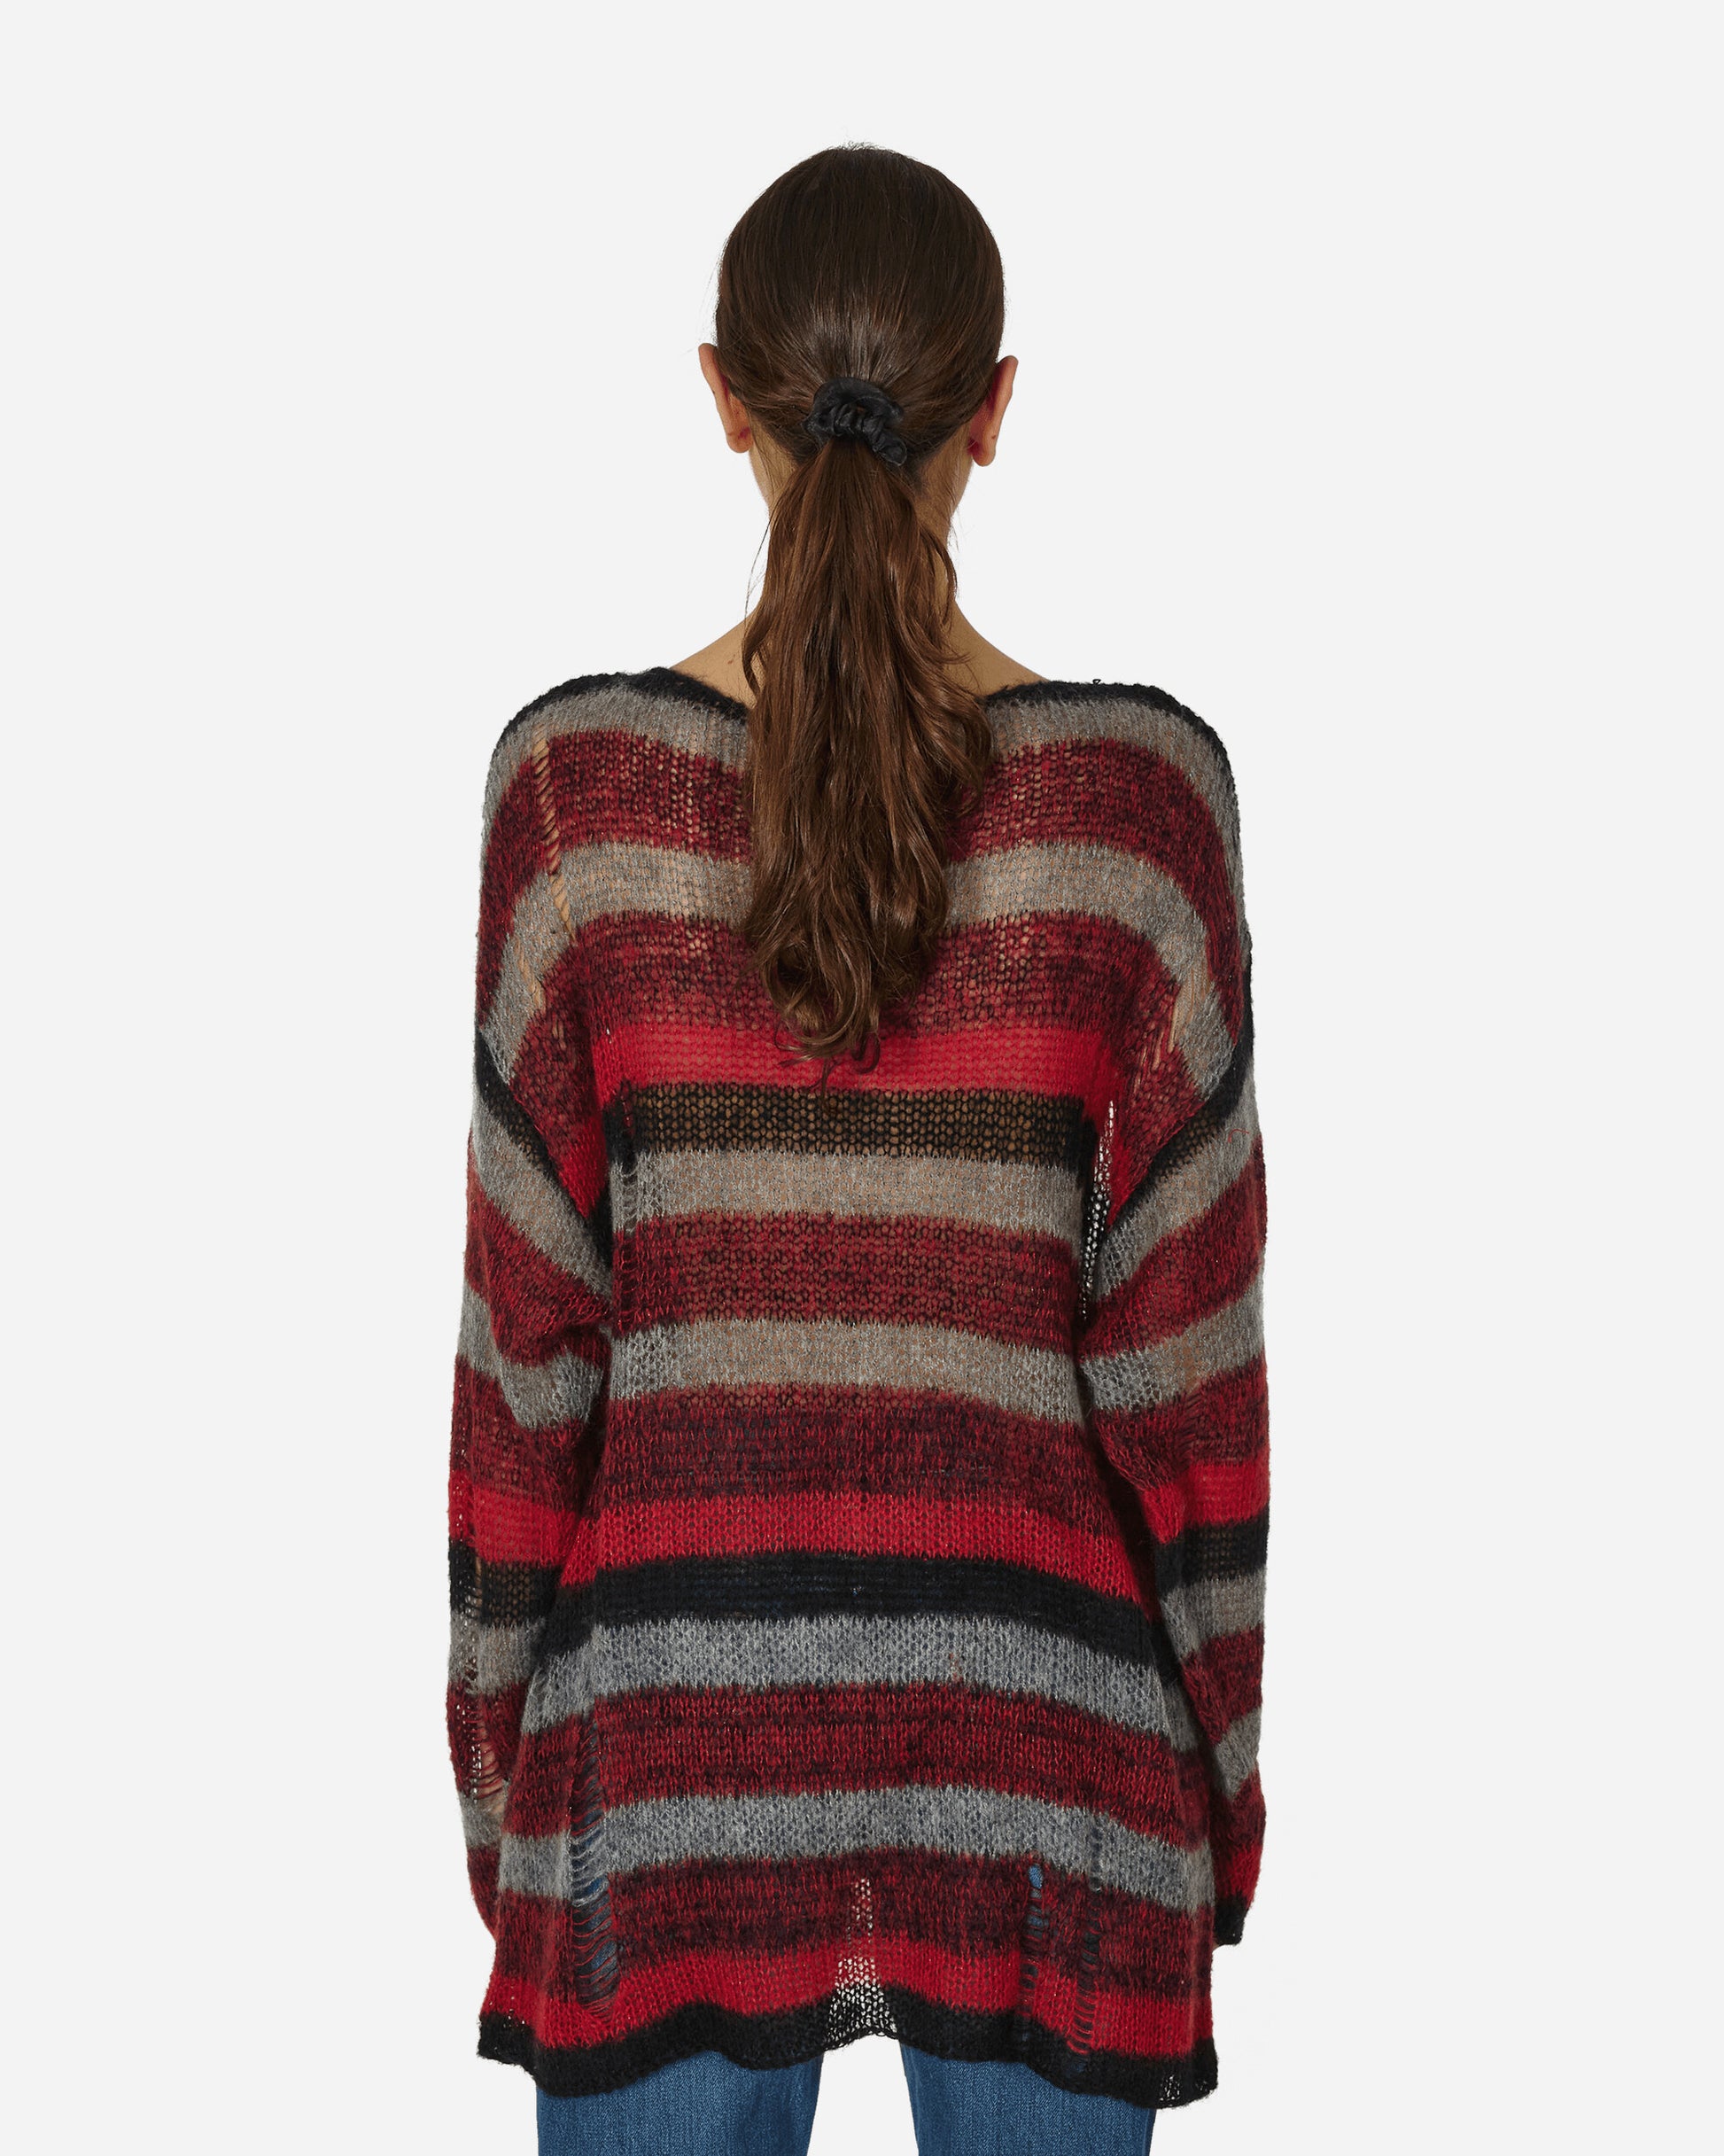 Hysteric Glamour Wmns Sweater Disco Sucks Red Knitwears Sweaters 01233NS06 50